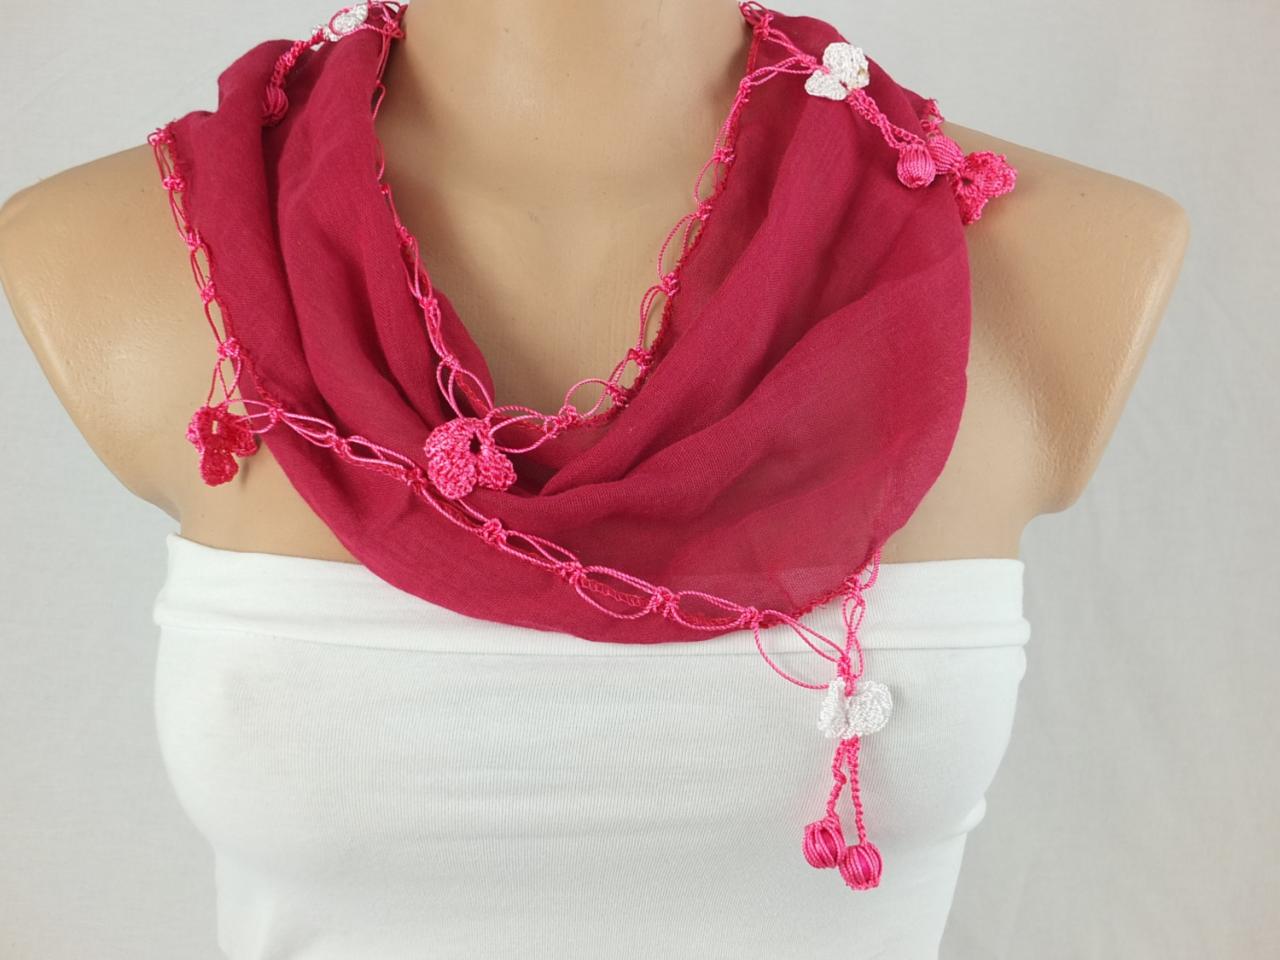 Fuchsia scarf ,hot pink cotton scarf with hand crochet edges , Turkish scarf,scarf necklace, foulard,scarflette,christmas gift